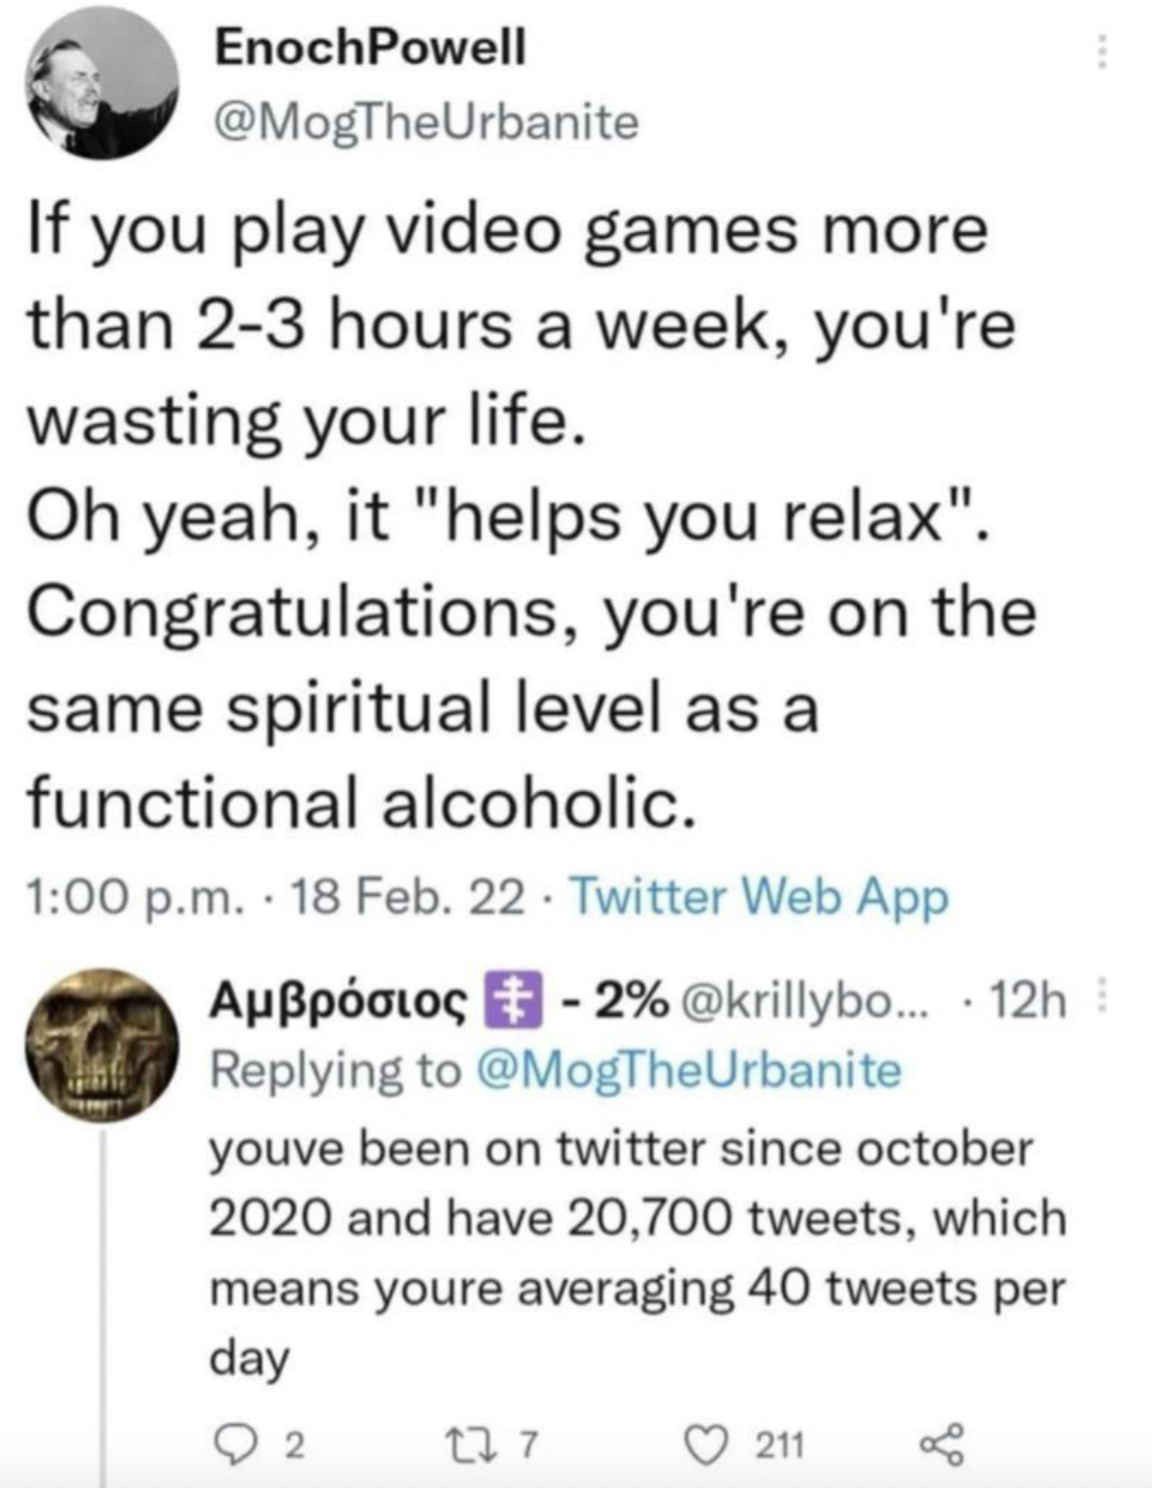 EnochPowell If you play video games more than 23 hours a week, you're wasting your life. Oh yeah, it "helps you relax". Congratulations, you're on the same spiritual level as a functional alcoholic. p.m. 18 Feb. 22 Twitter Web App Auios 2% ... 12h youve…